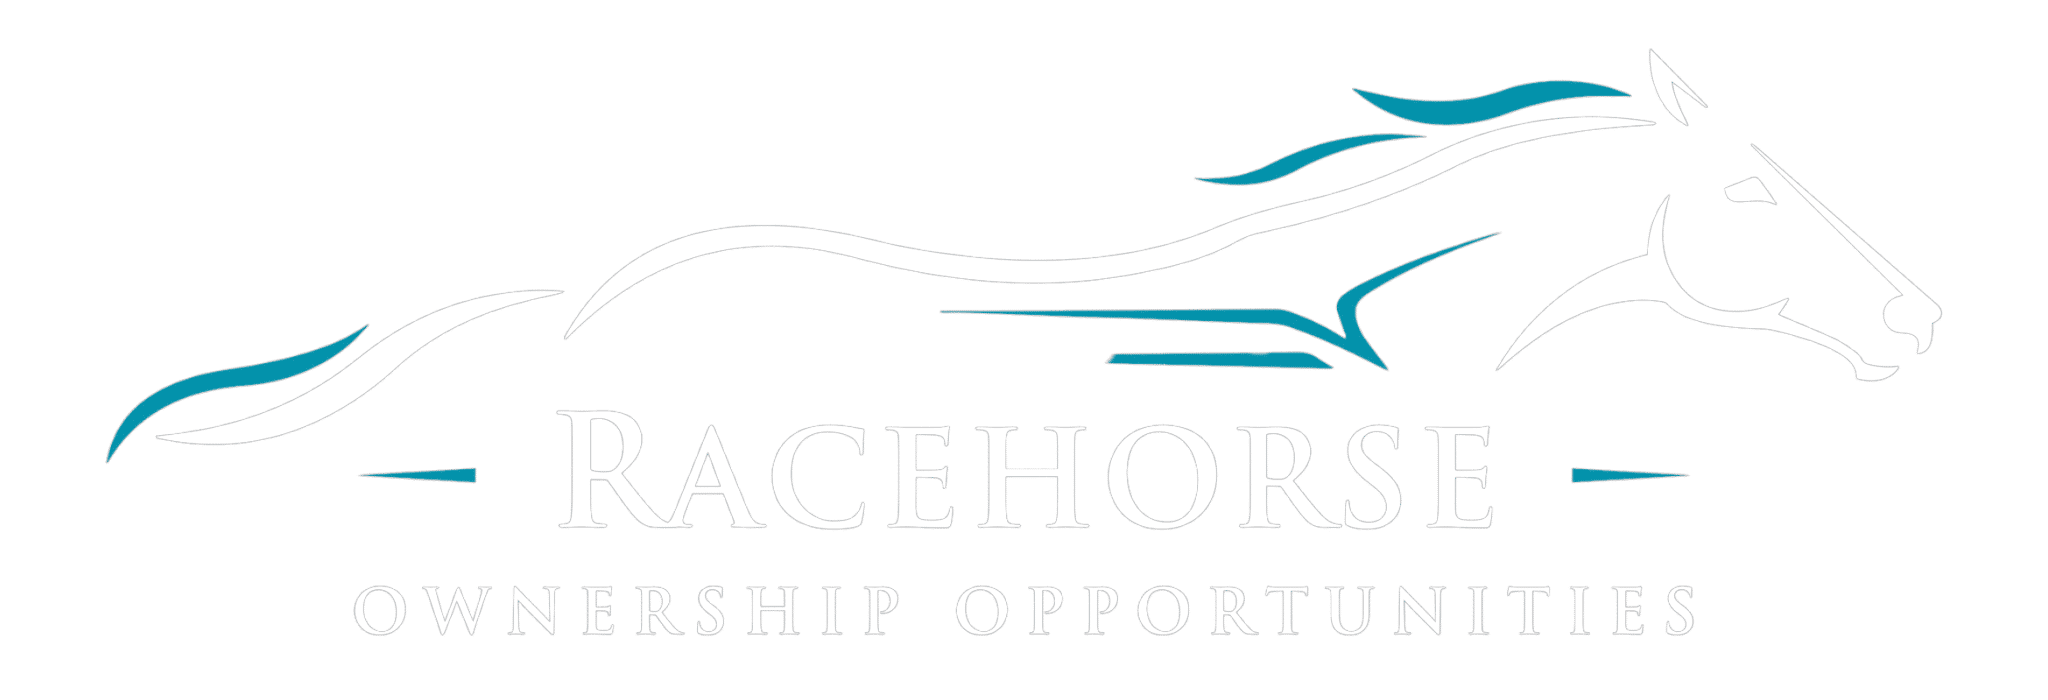 T/As Racehorse Ownership Opportunities